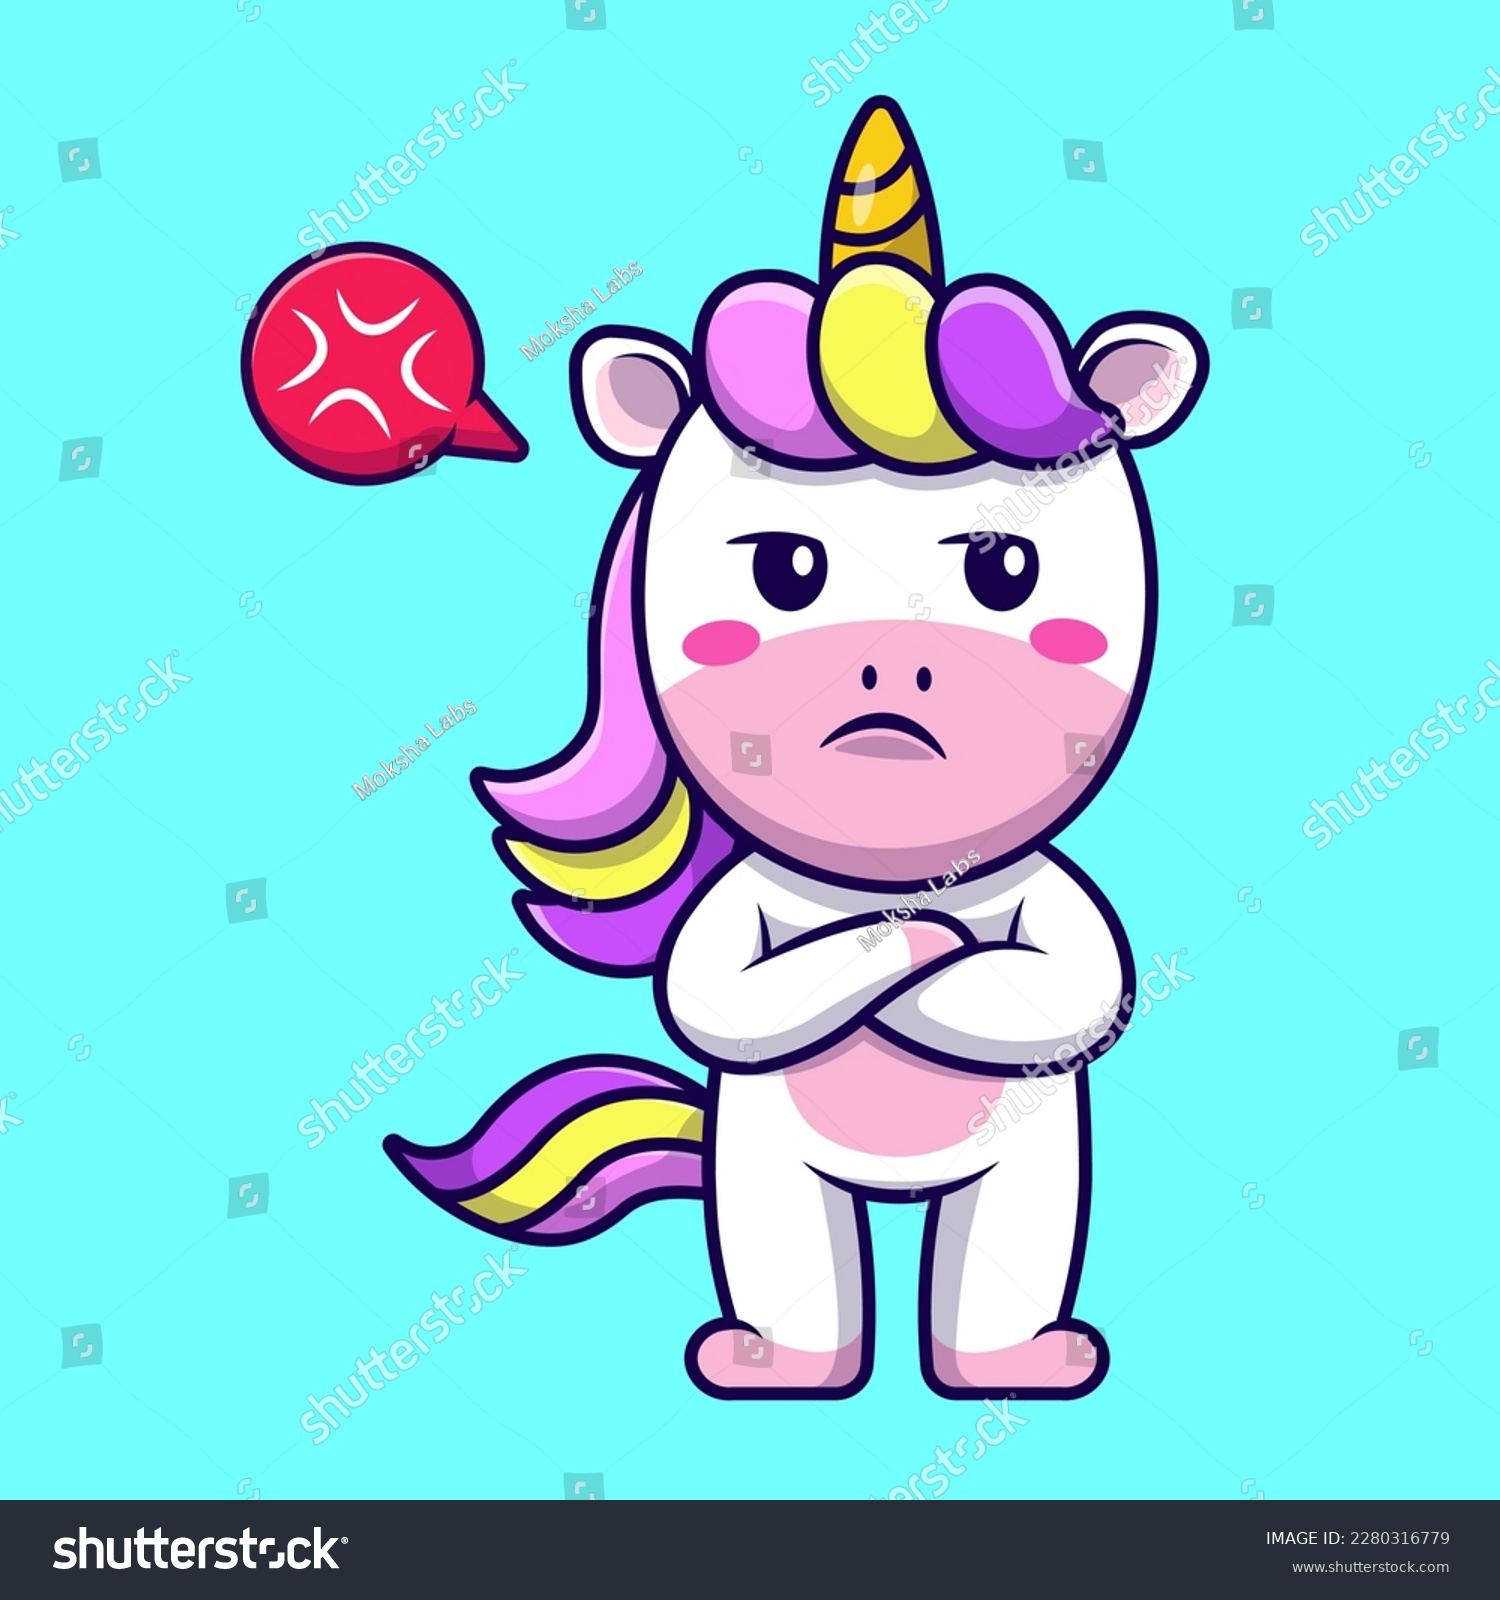 SVG of Cute Angry Unicorn Cartoon Vector Icons Illustration. Flat Cartoon Concept. Suitable for any creative project.
 svg